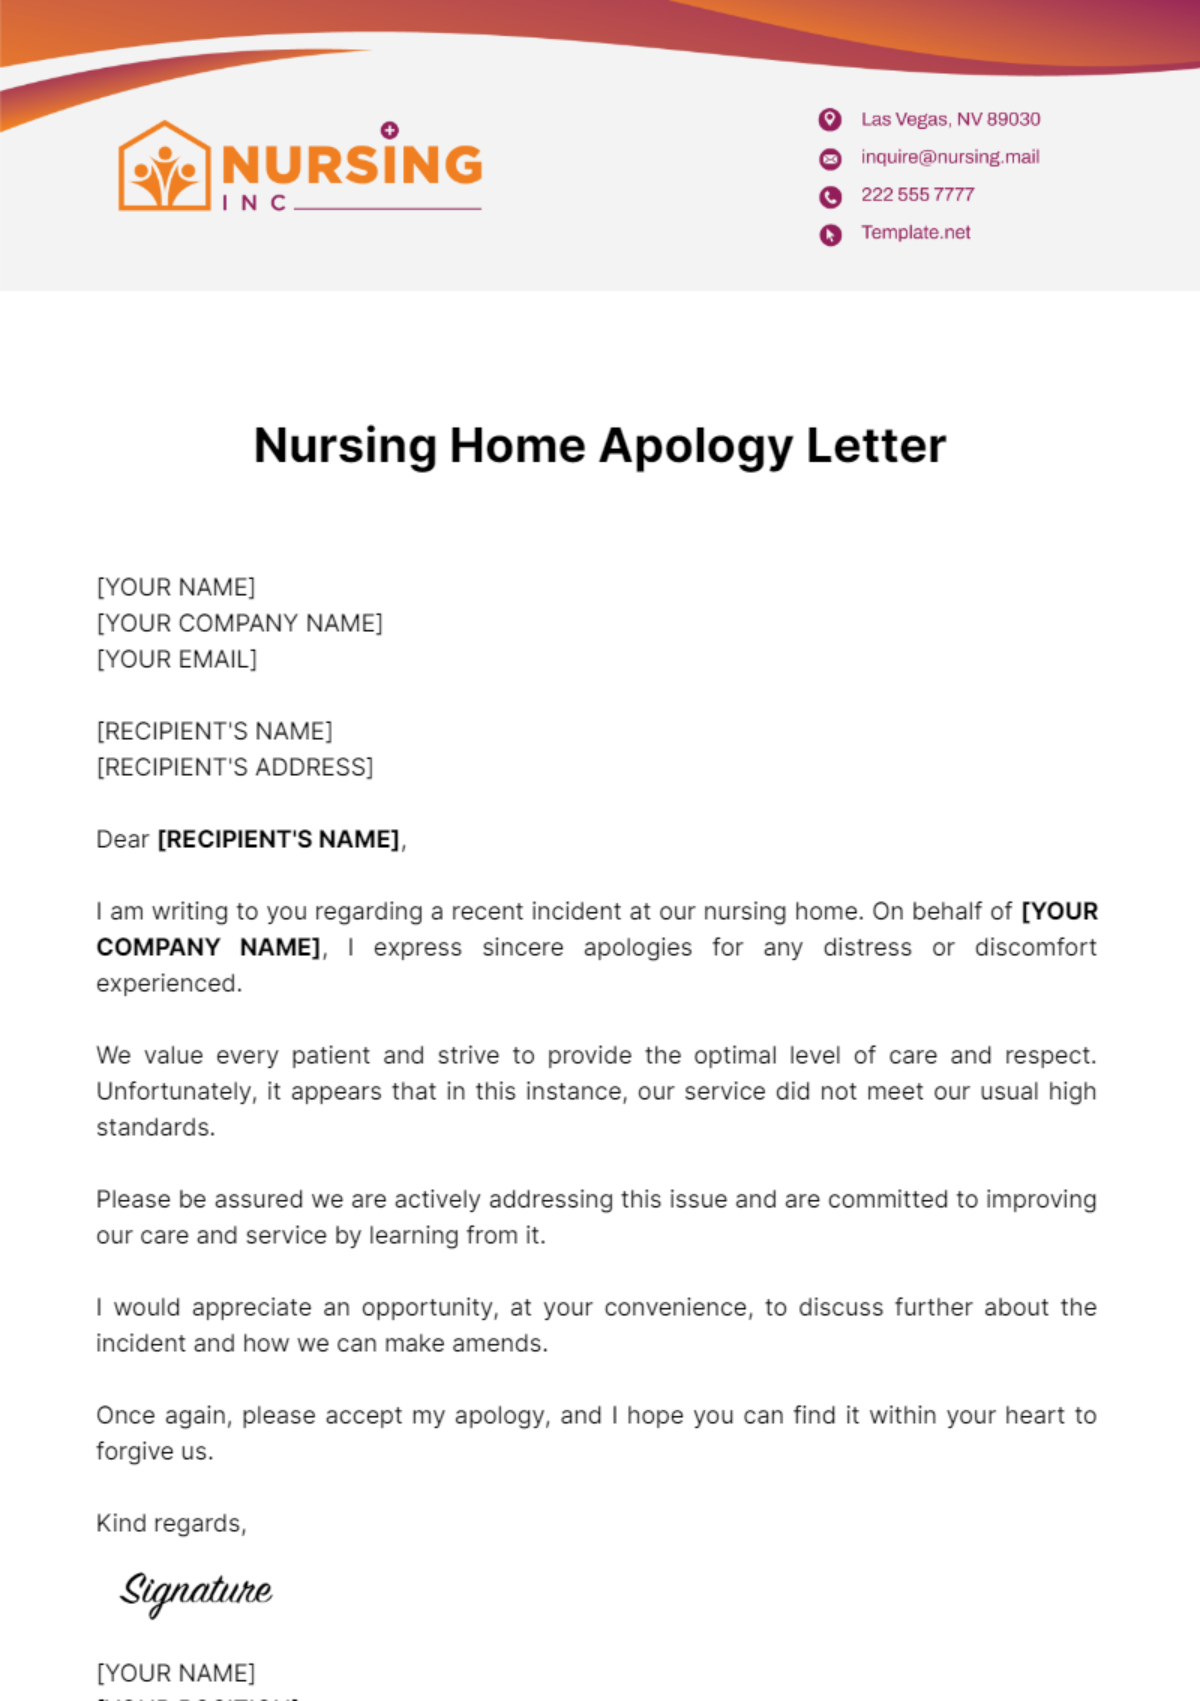 Nursing Home Apology Letter Template